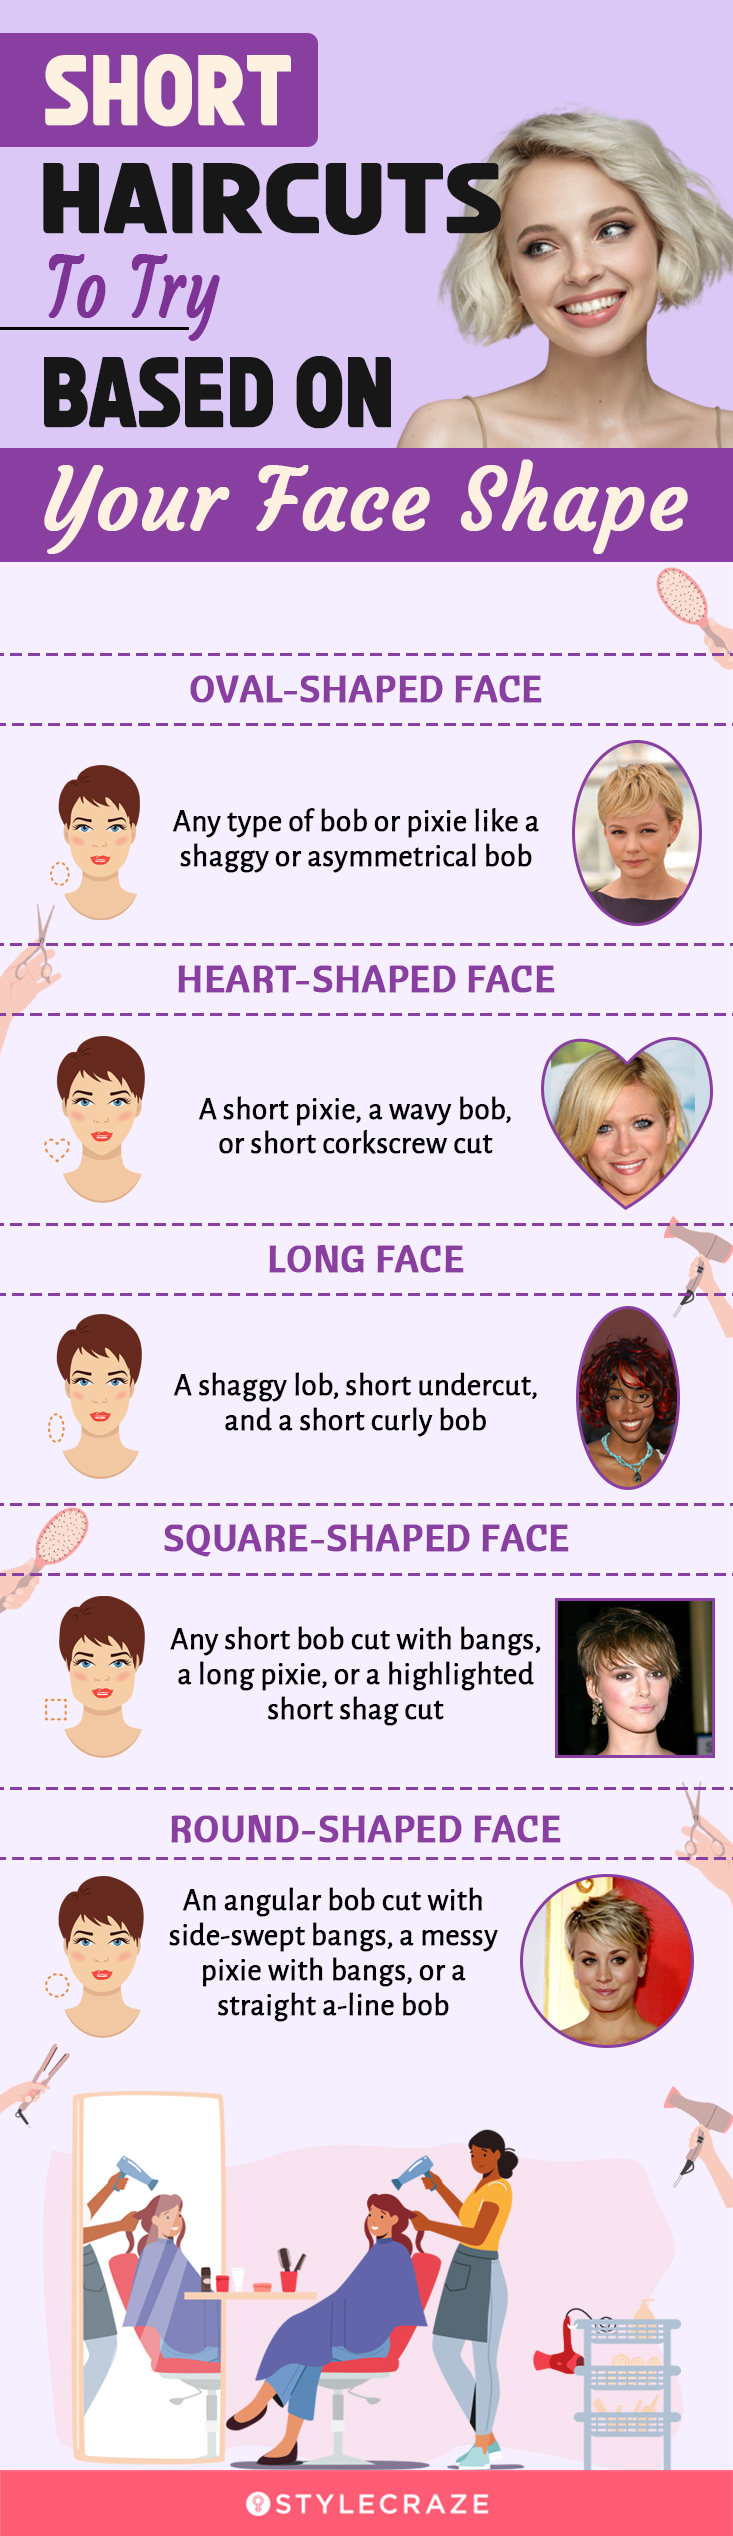 short haircutsto try based on your face shape (infographic)